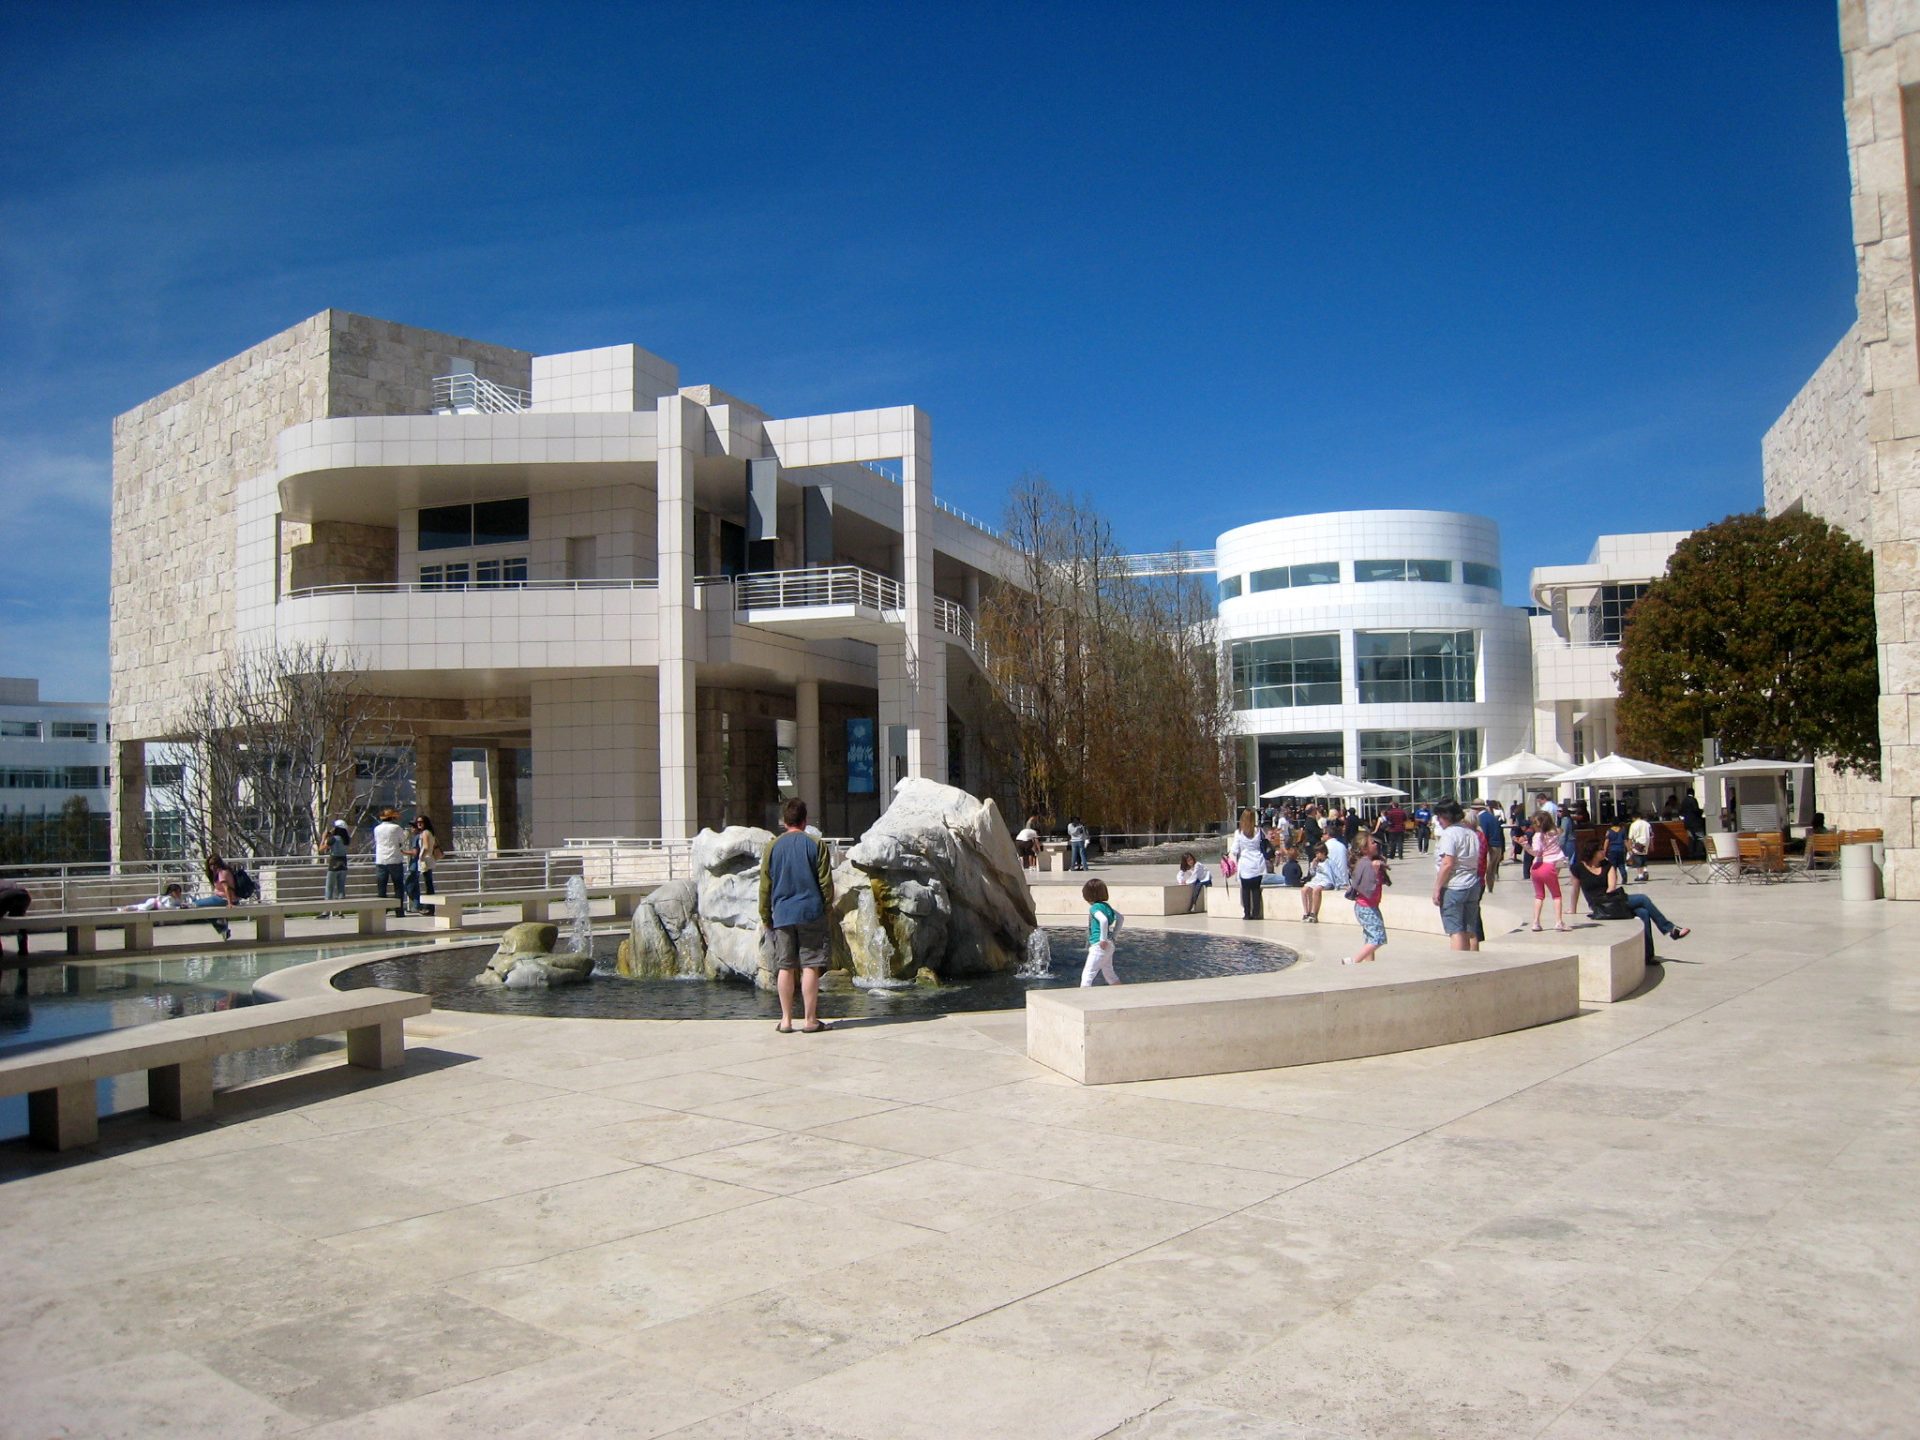 Job Posting: Reasearch Specialist at the Getty Research Institute - Art History and Digital Humanities